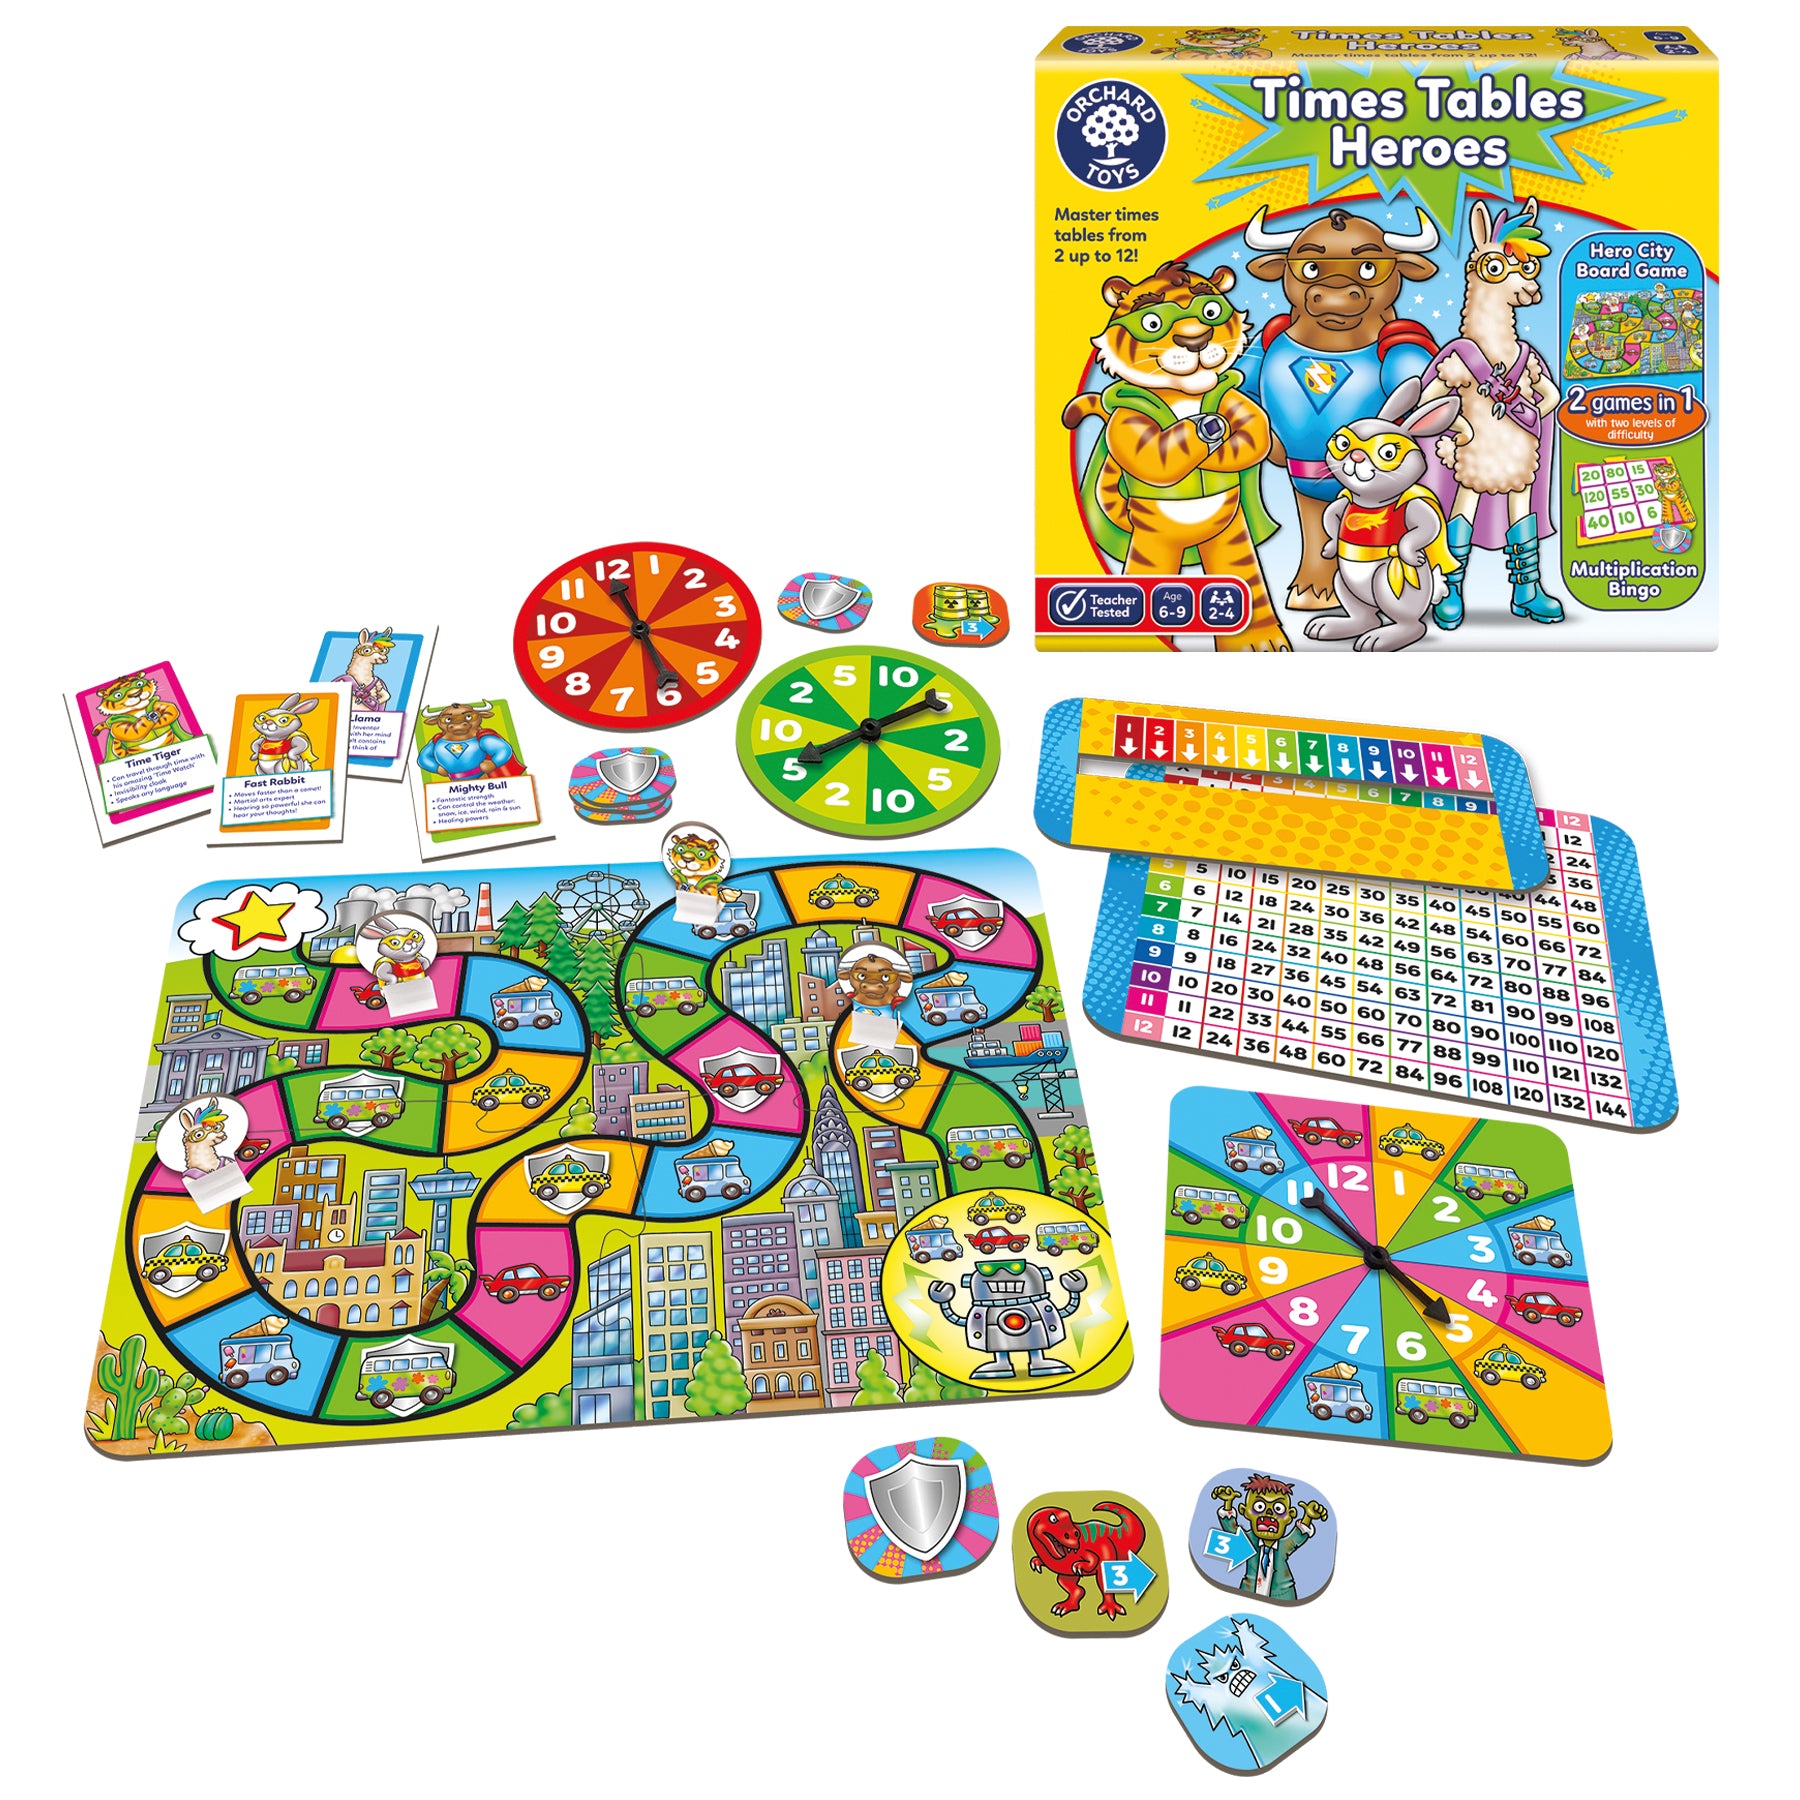 Orchard Toys Times Tables Heroes 2-in-1 Game